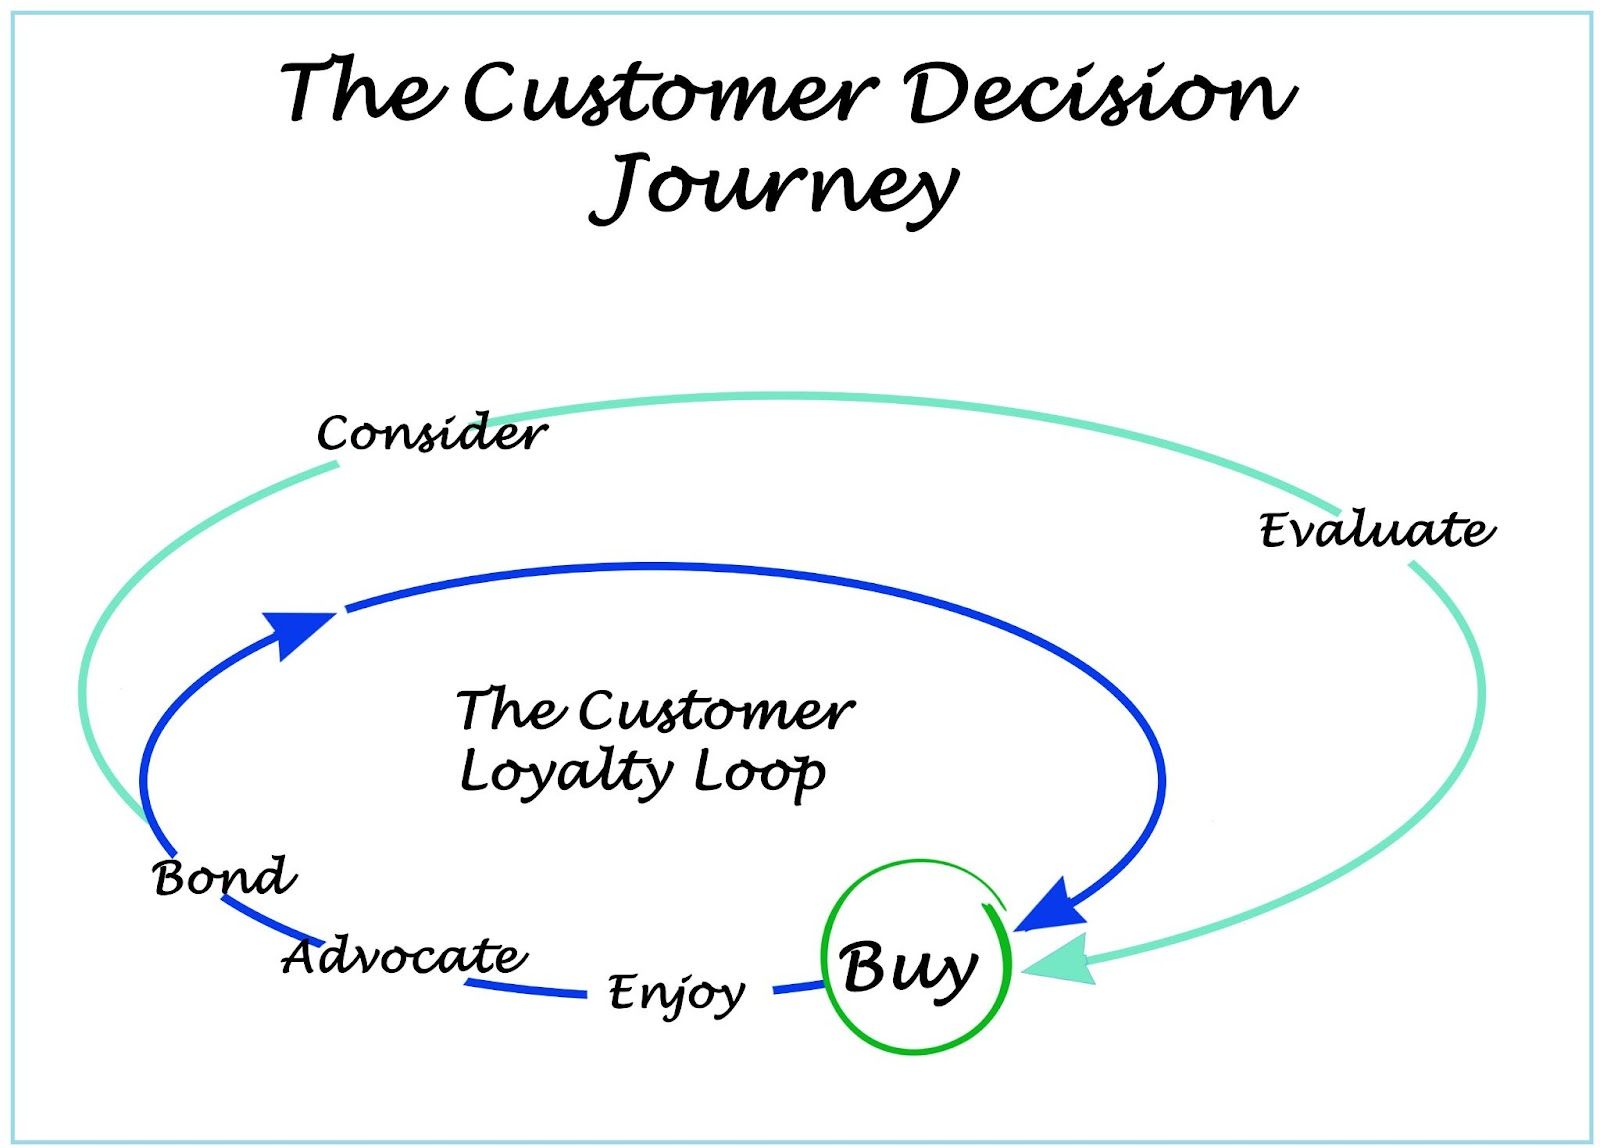 An effective customer retention program focuses on keeping the customers in the loyalty loop.